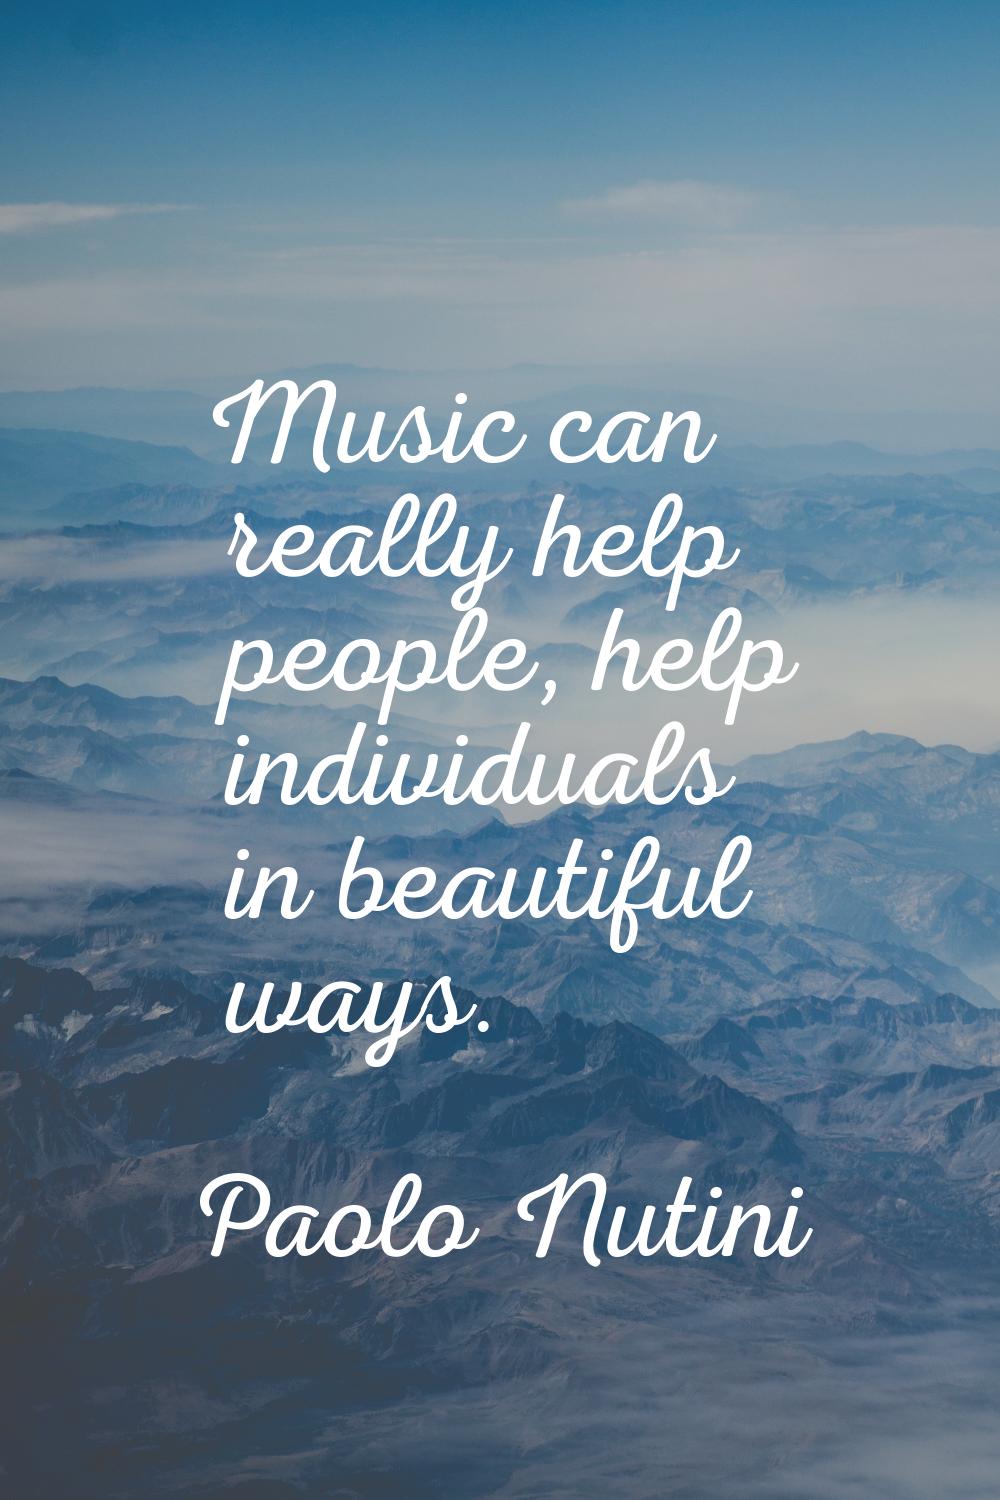 Music can really help people, help individuals in beautiful ways.